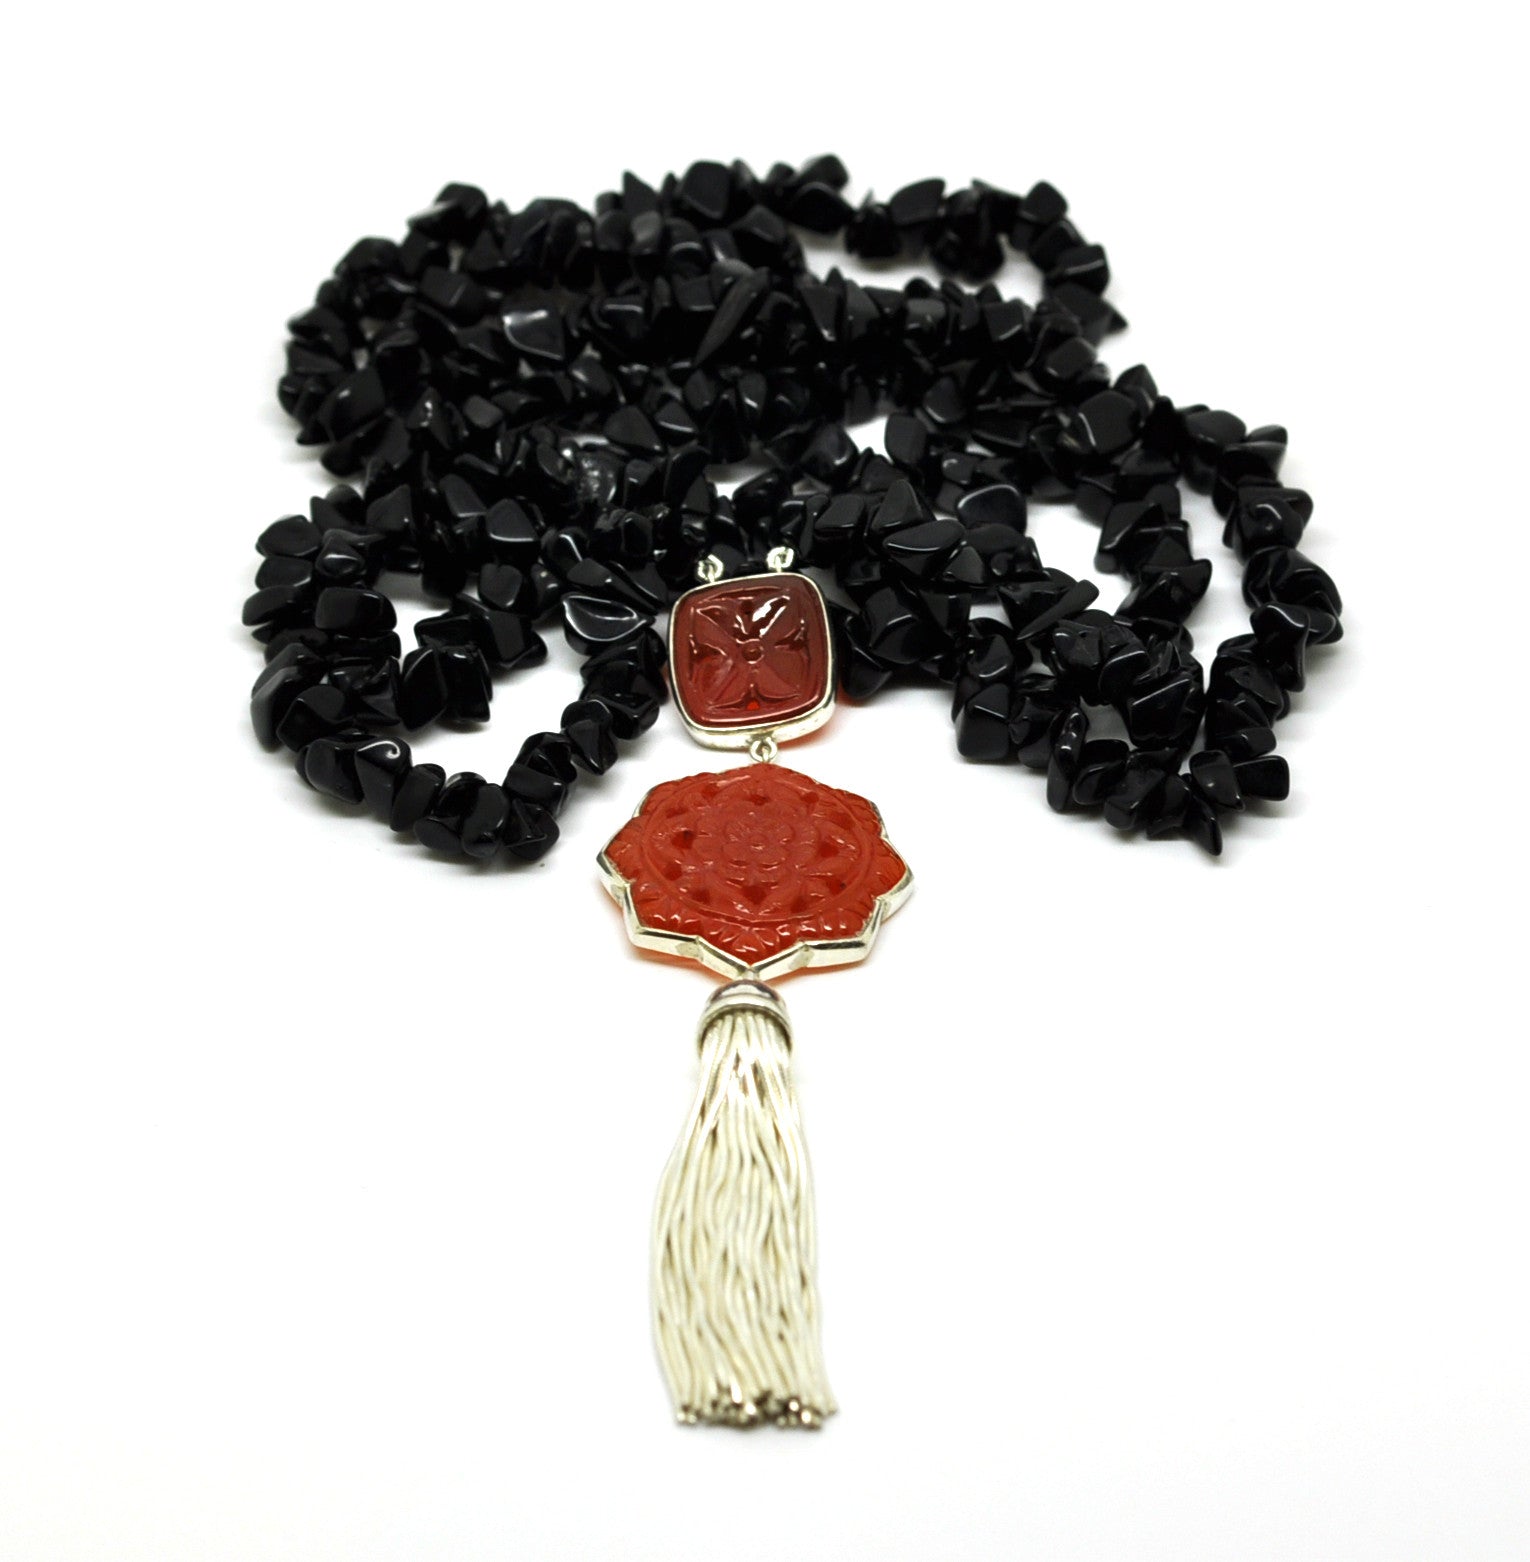 SOLD - 20 in 2020 - Black onyx necklace